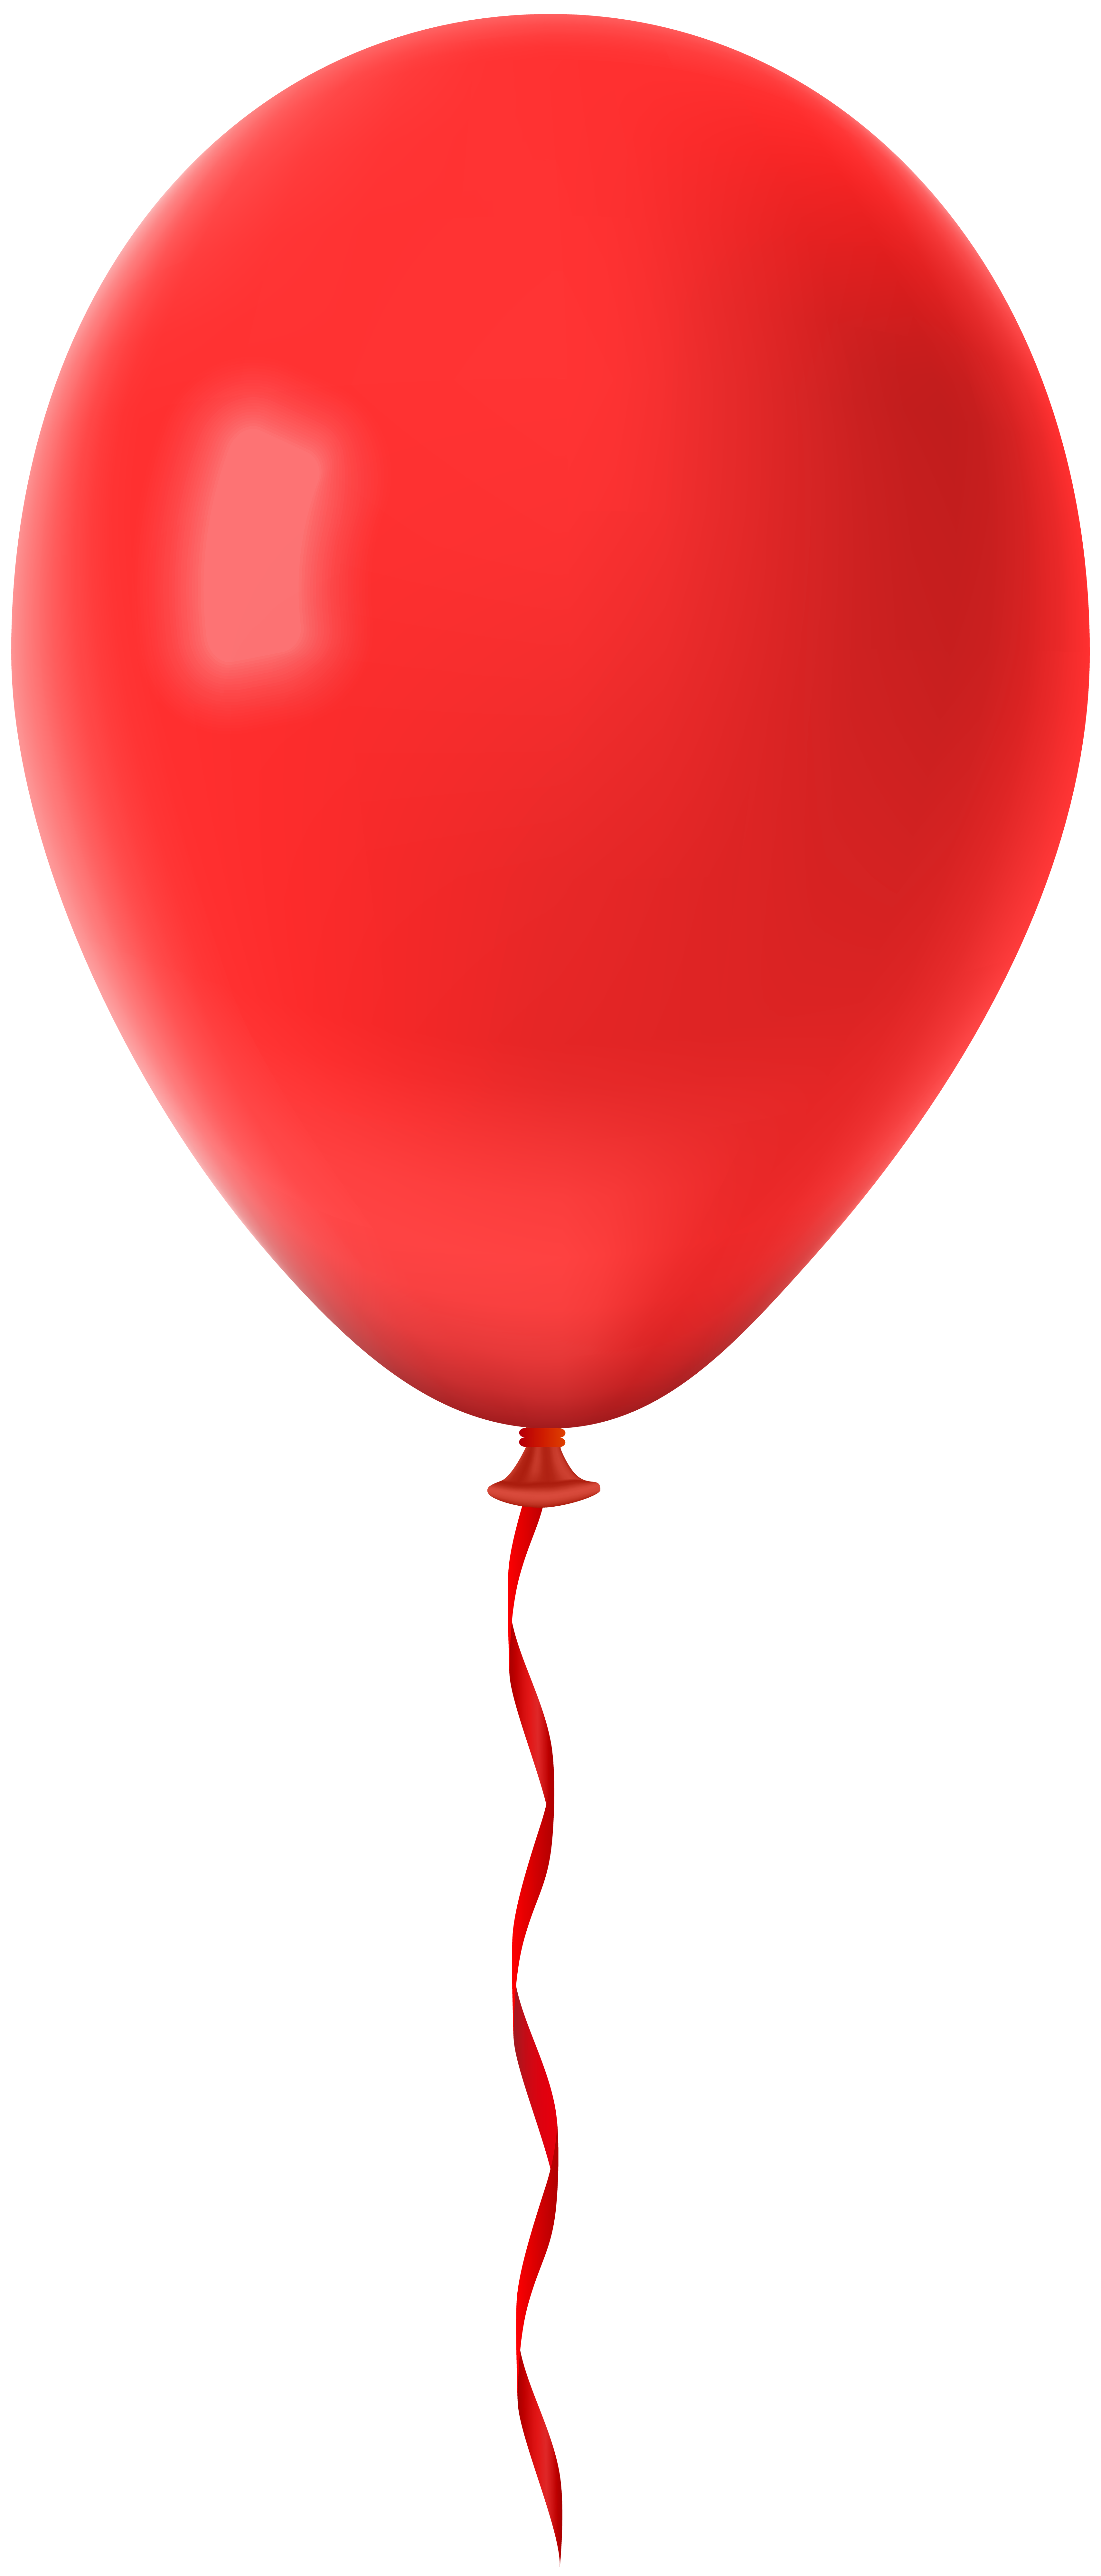 balloon-red-red-balloon-png-download-2472-4032-free-transparent-balloon-png-download